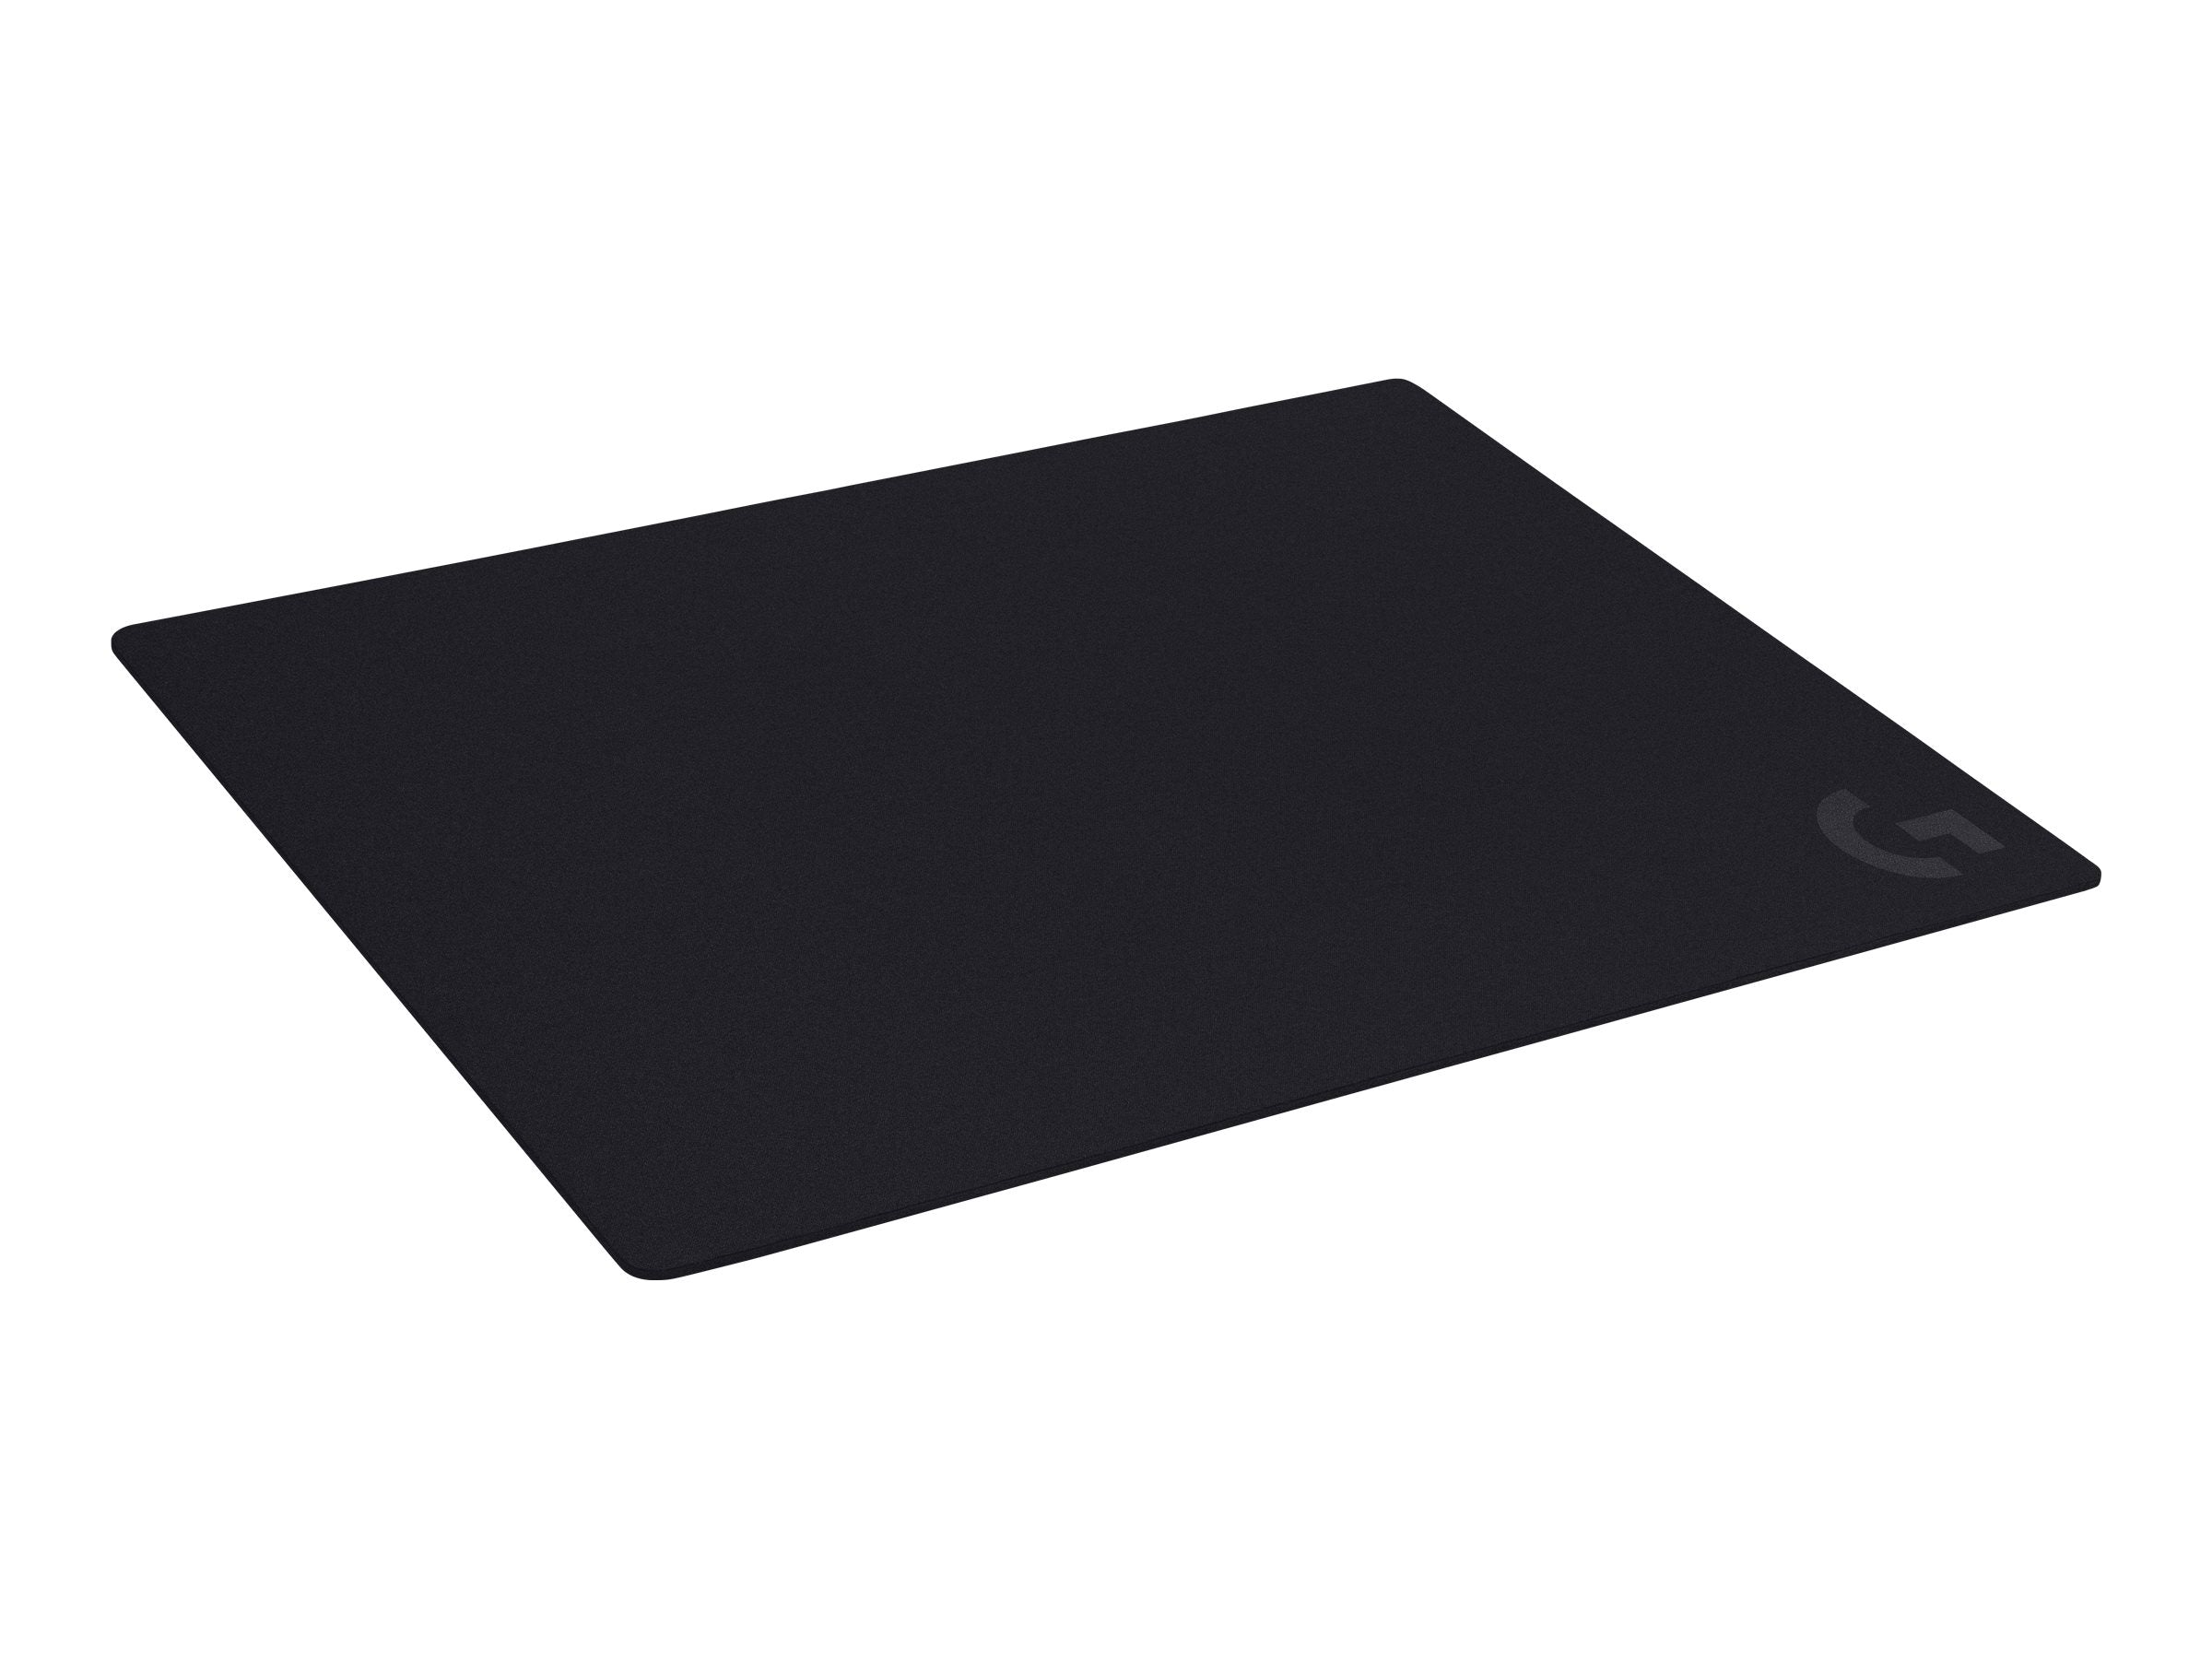 Logitech - G640 Large Cloth Gaming Mouse Pad